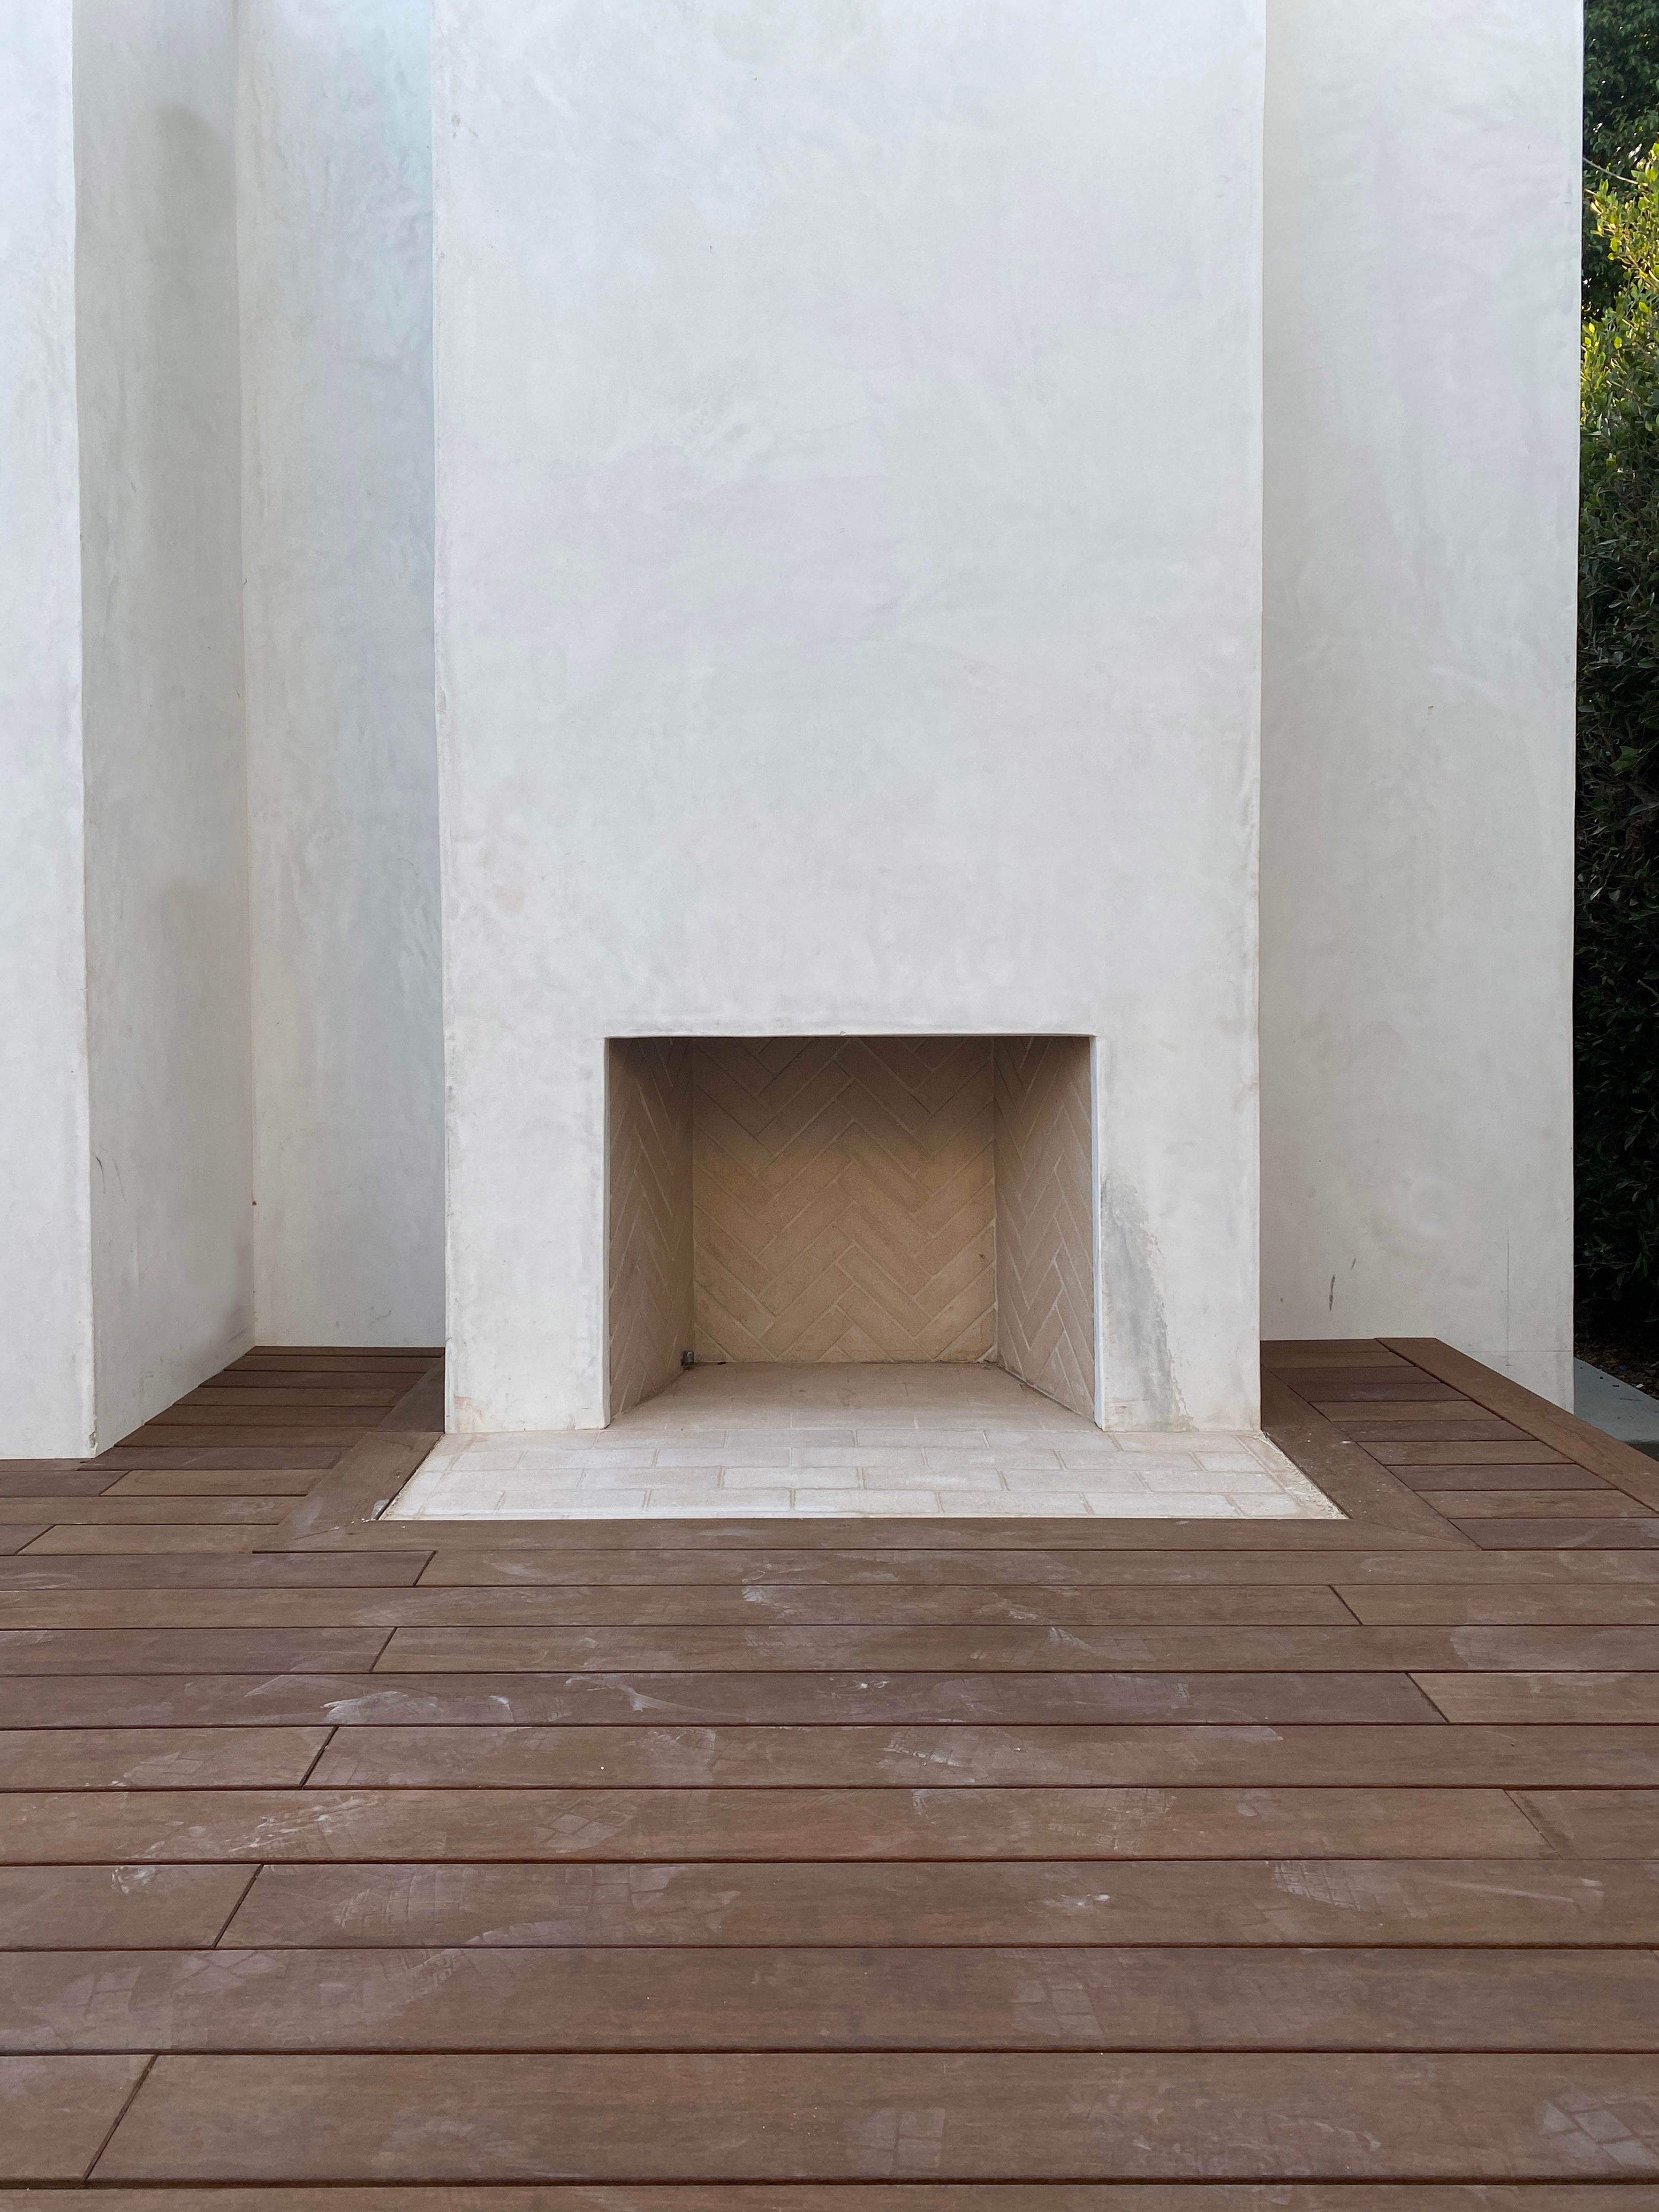 An outdoor fireplace clad in smooth stucco with a sustainable bamboo deck